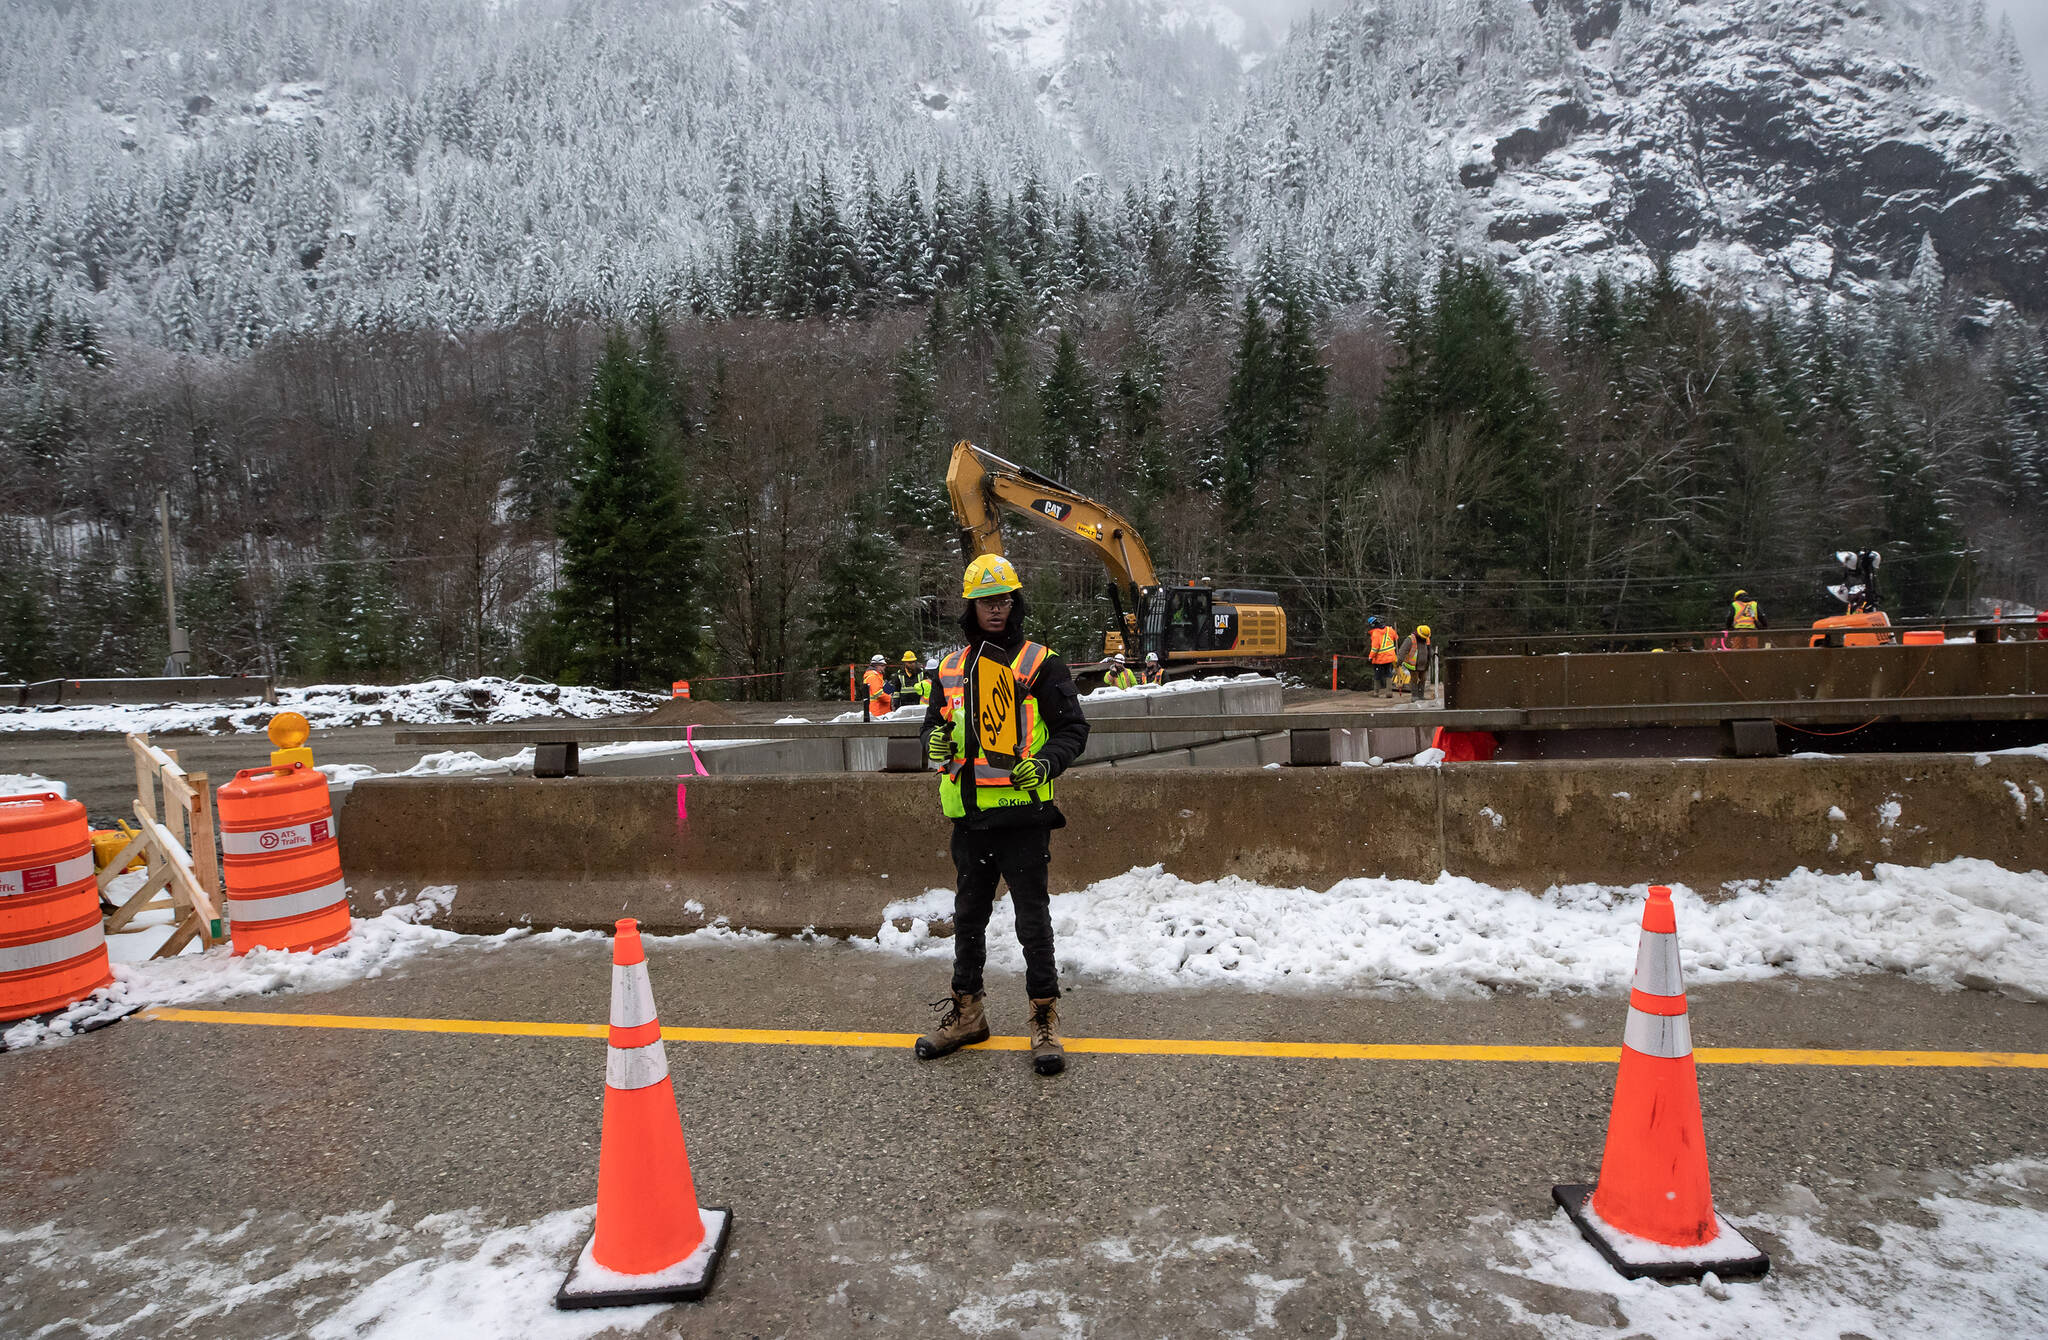 A flagger directs construction traffic while heavy equipment is used as repairs to a bridge and road that was washed out by flooding are underway on the Coquihalla Highway near Carolin Mine Road, northeast of Hope, B.C., Friday, Dec. 10, 2021. According to the B.C. Transportation Ministry the highway, which was heavily damaged in numerous places during last month’s flooding and mudslides, is on track to reopen to essential travel in early January if weather cooperates. THE CANADIAN PRESS/Darryl Dyck